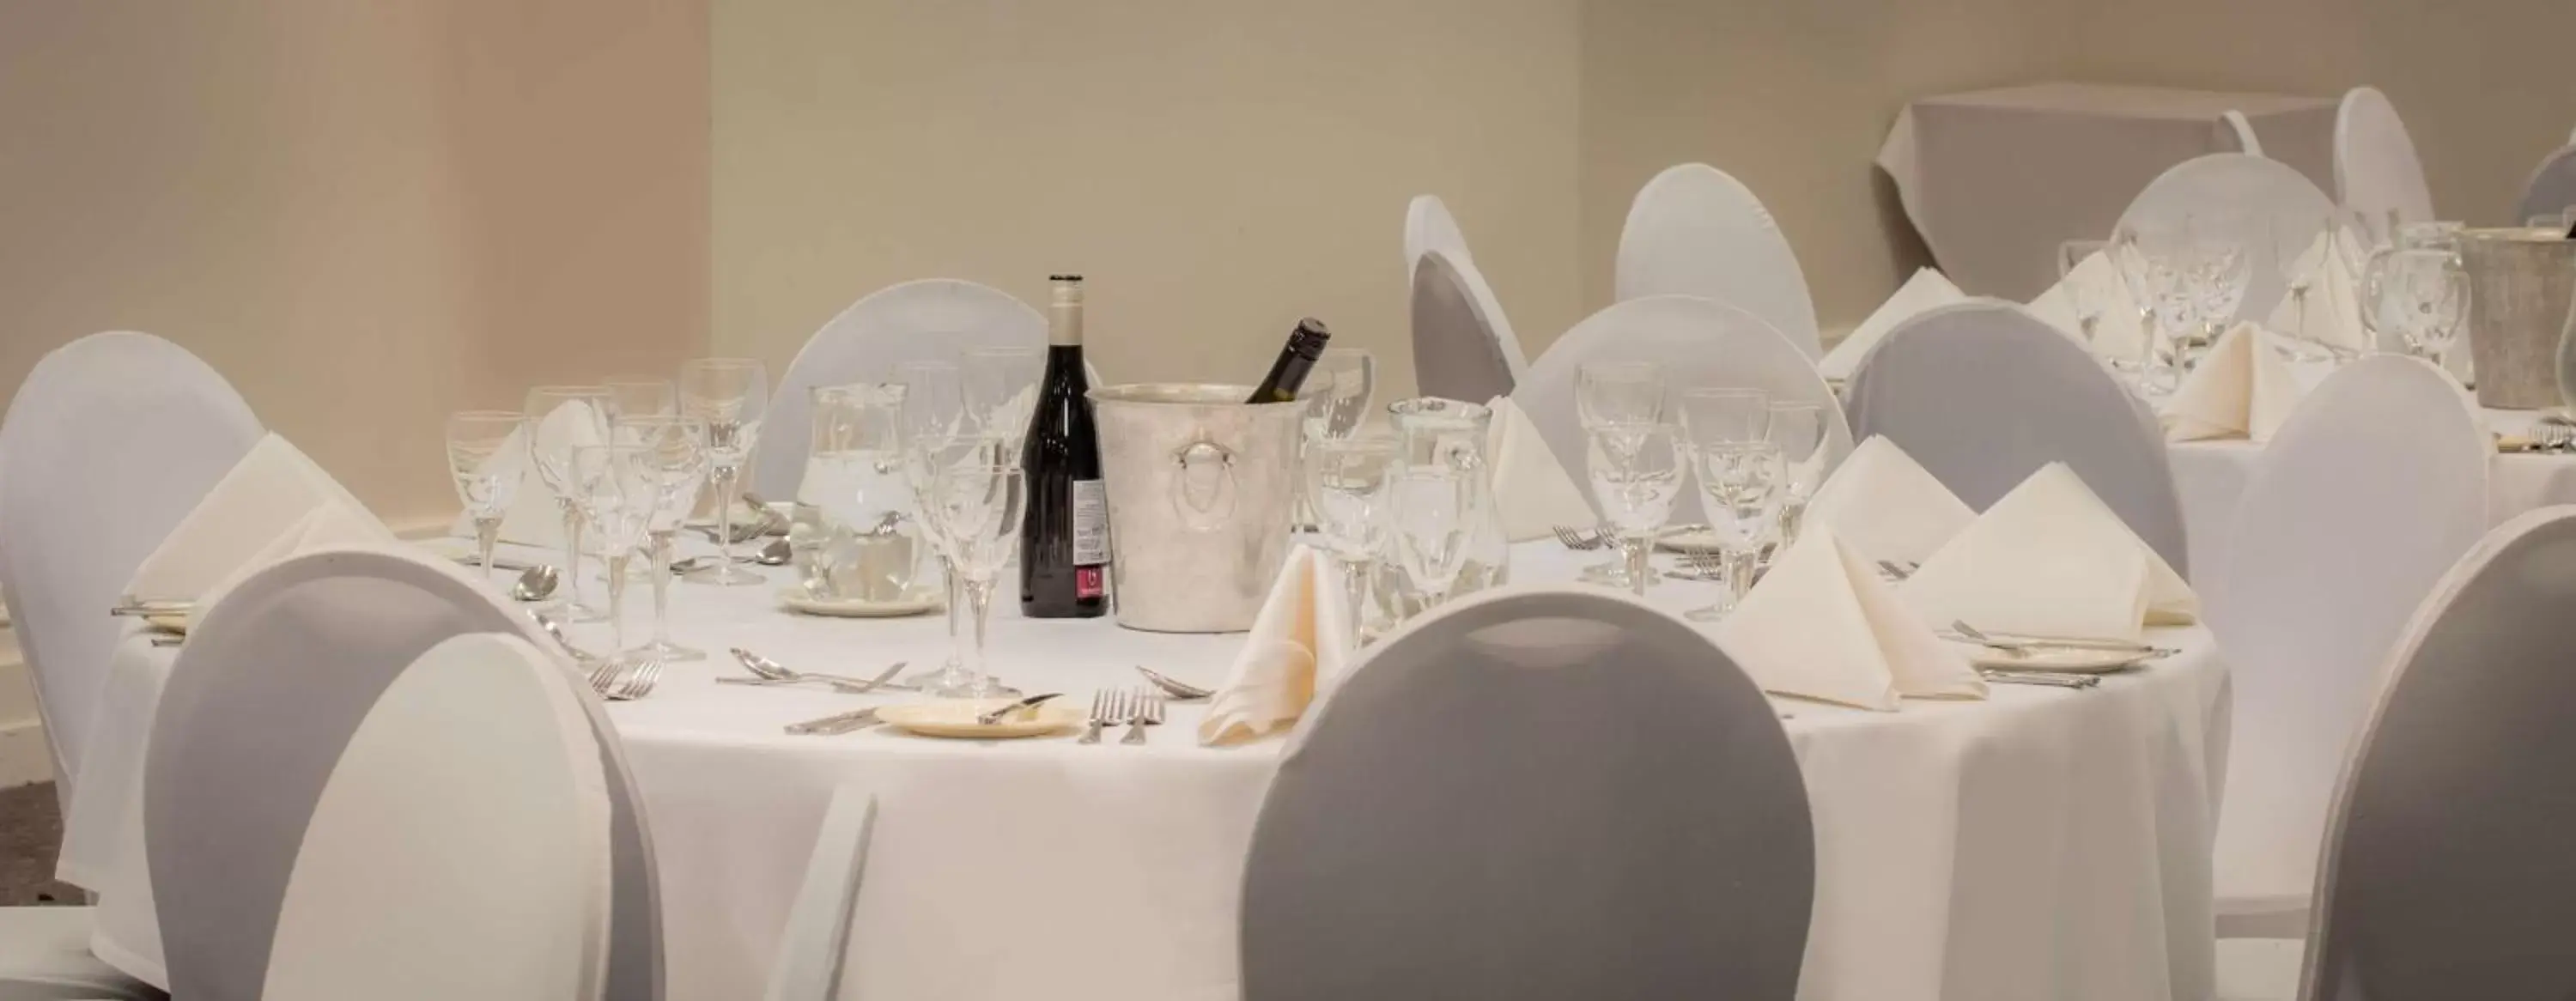 Meeting/conference room, Banquet Facilities in Hilton Nottingham Hotel